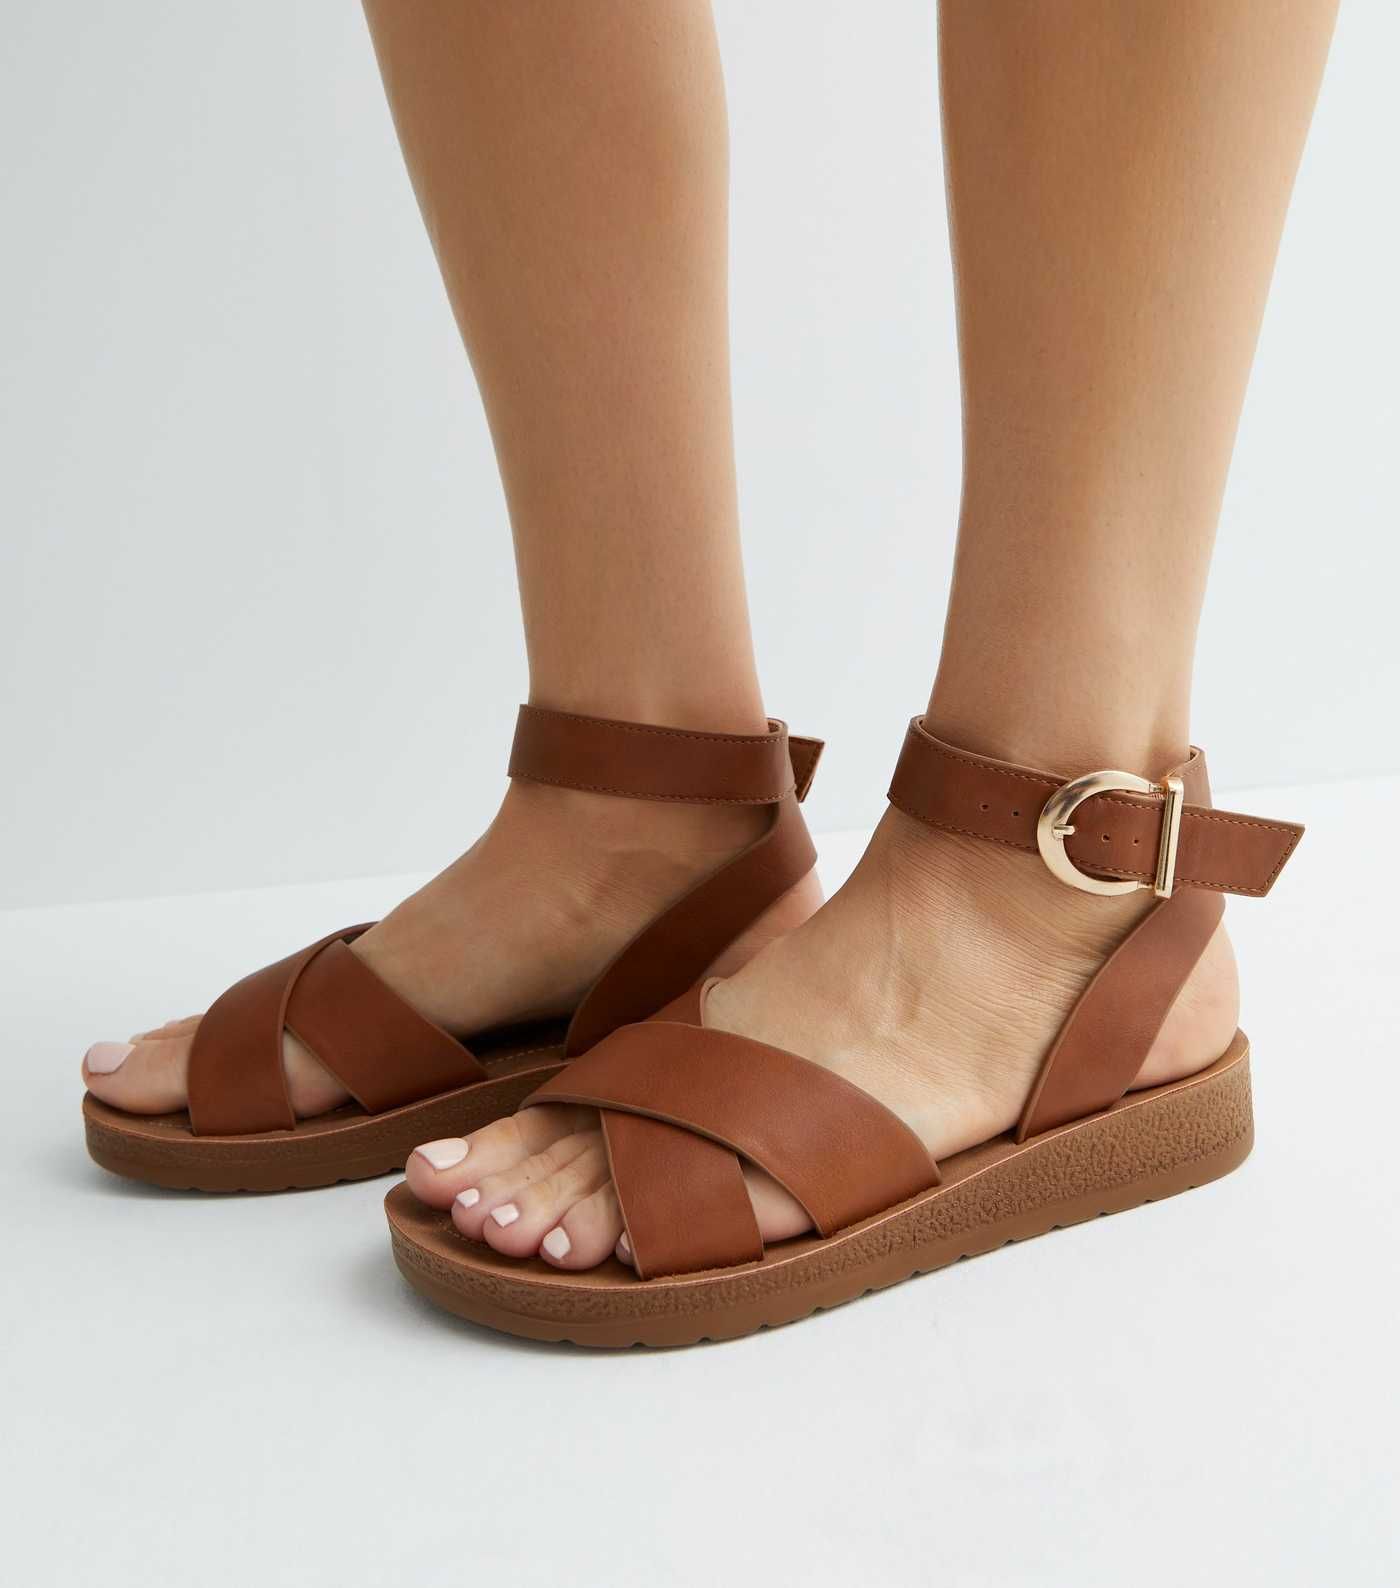 Wide Fit Tan Leather-Look Cross Strap Footbed Sandals
						
						Add to Saved Items
						Remov... | New Look (UK)